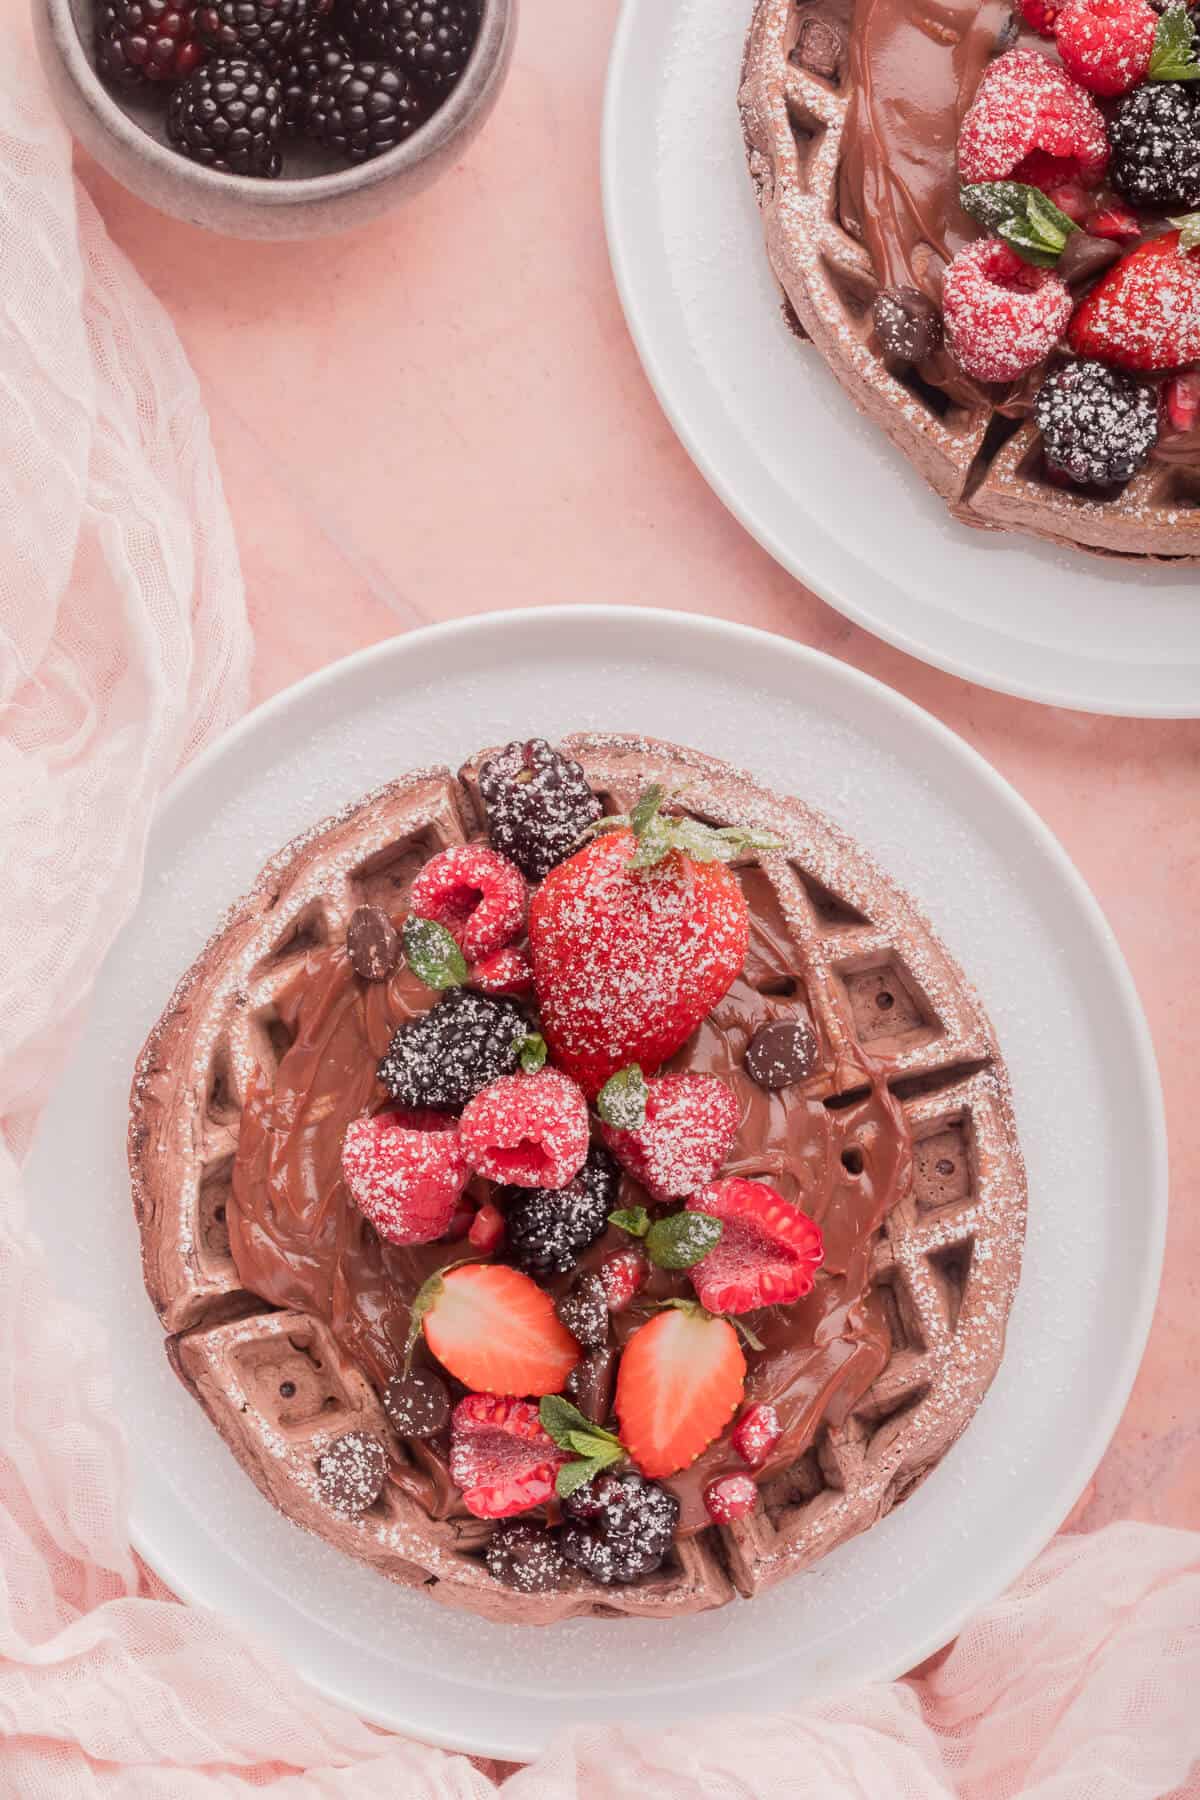 Chocolate waffles on a plate with chocolate sauce and berries.